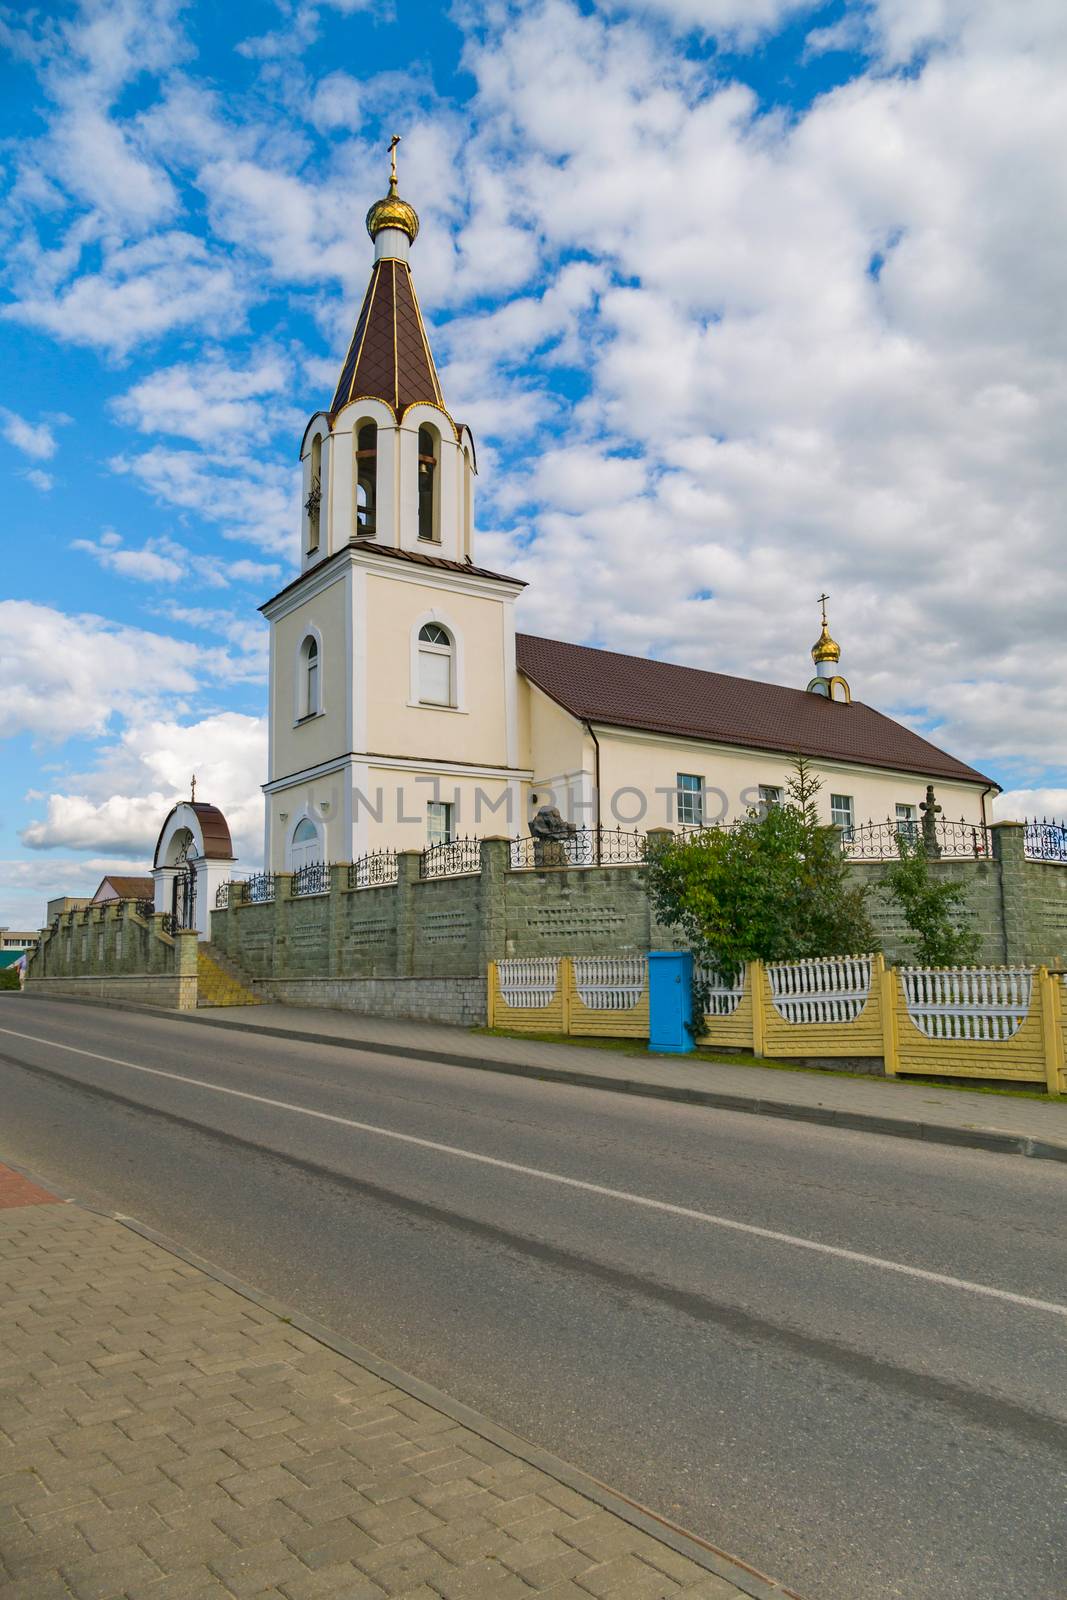 a small church surrounded by a high fence against a cloudy blue sky